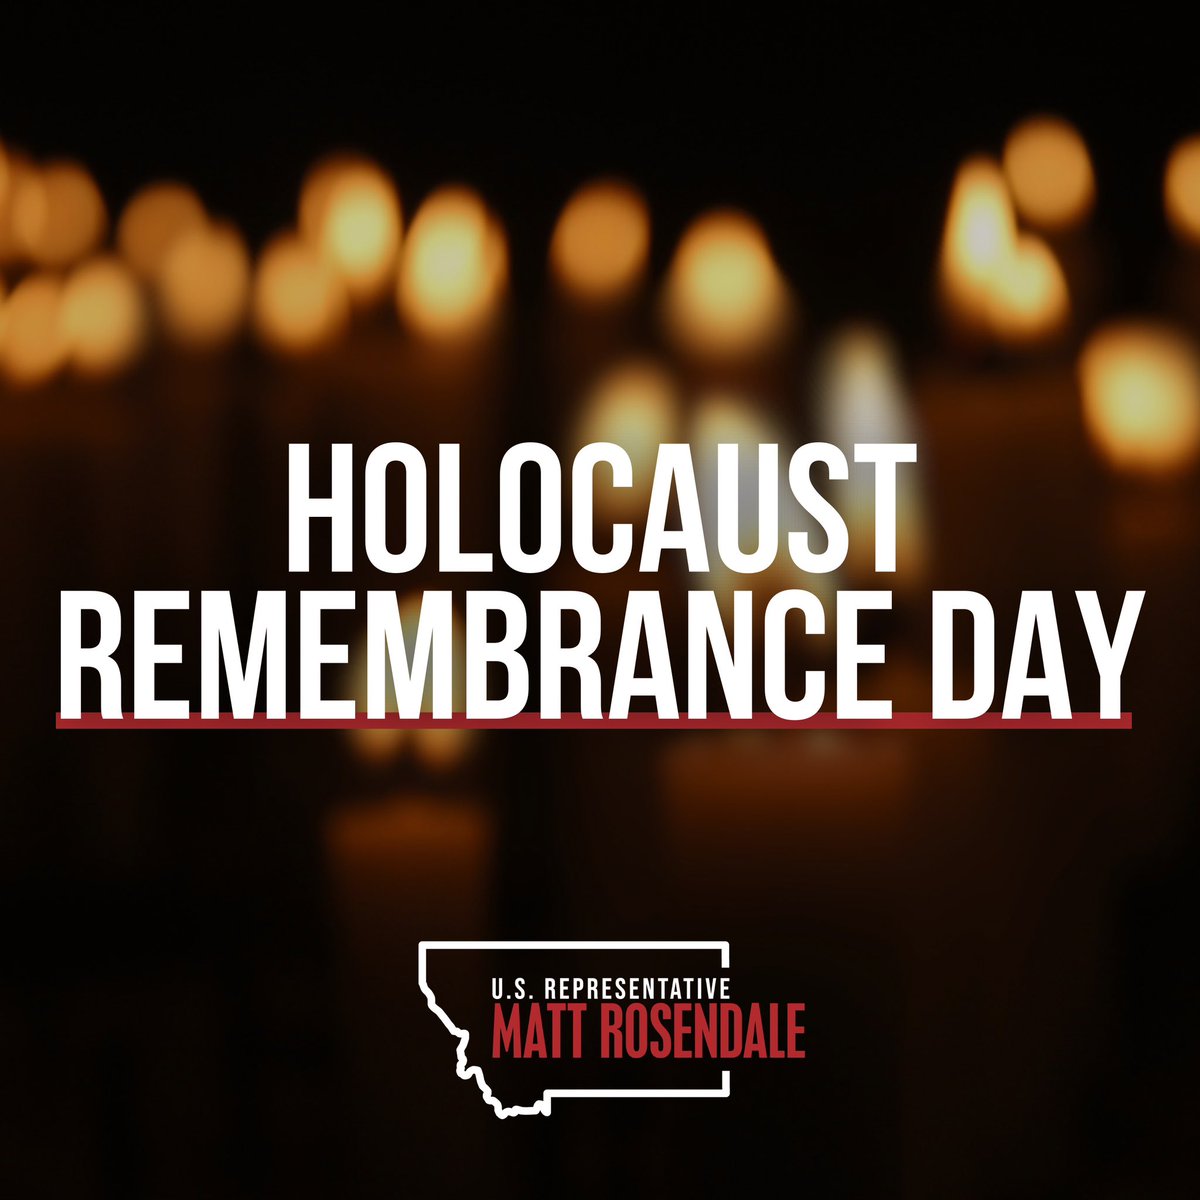 Today on Holocaust Remembrance Day, we mourn and honor the lives of the over 6 million Jews who were tragically murdered under the Nazi regime more than 70 years ago. 

May we never forget.